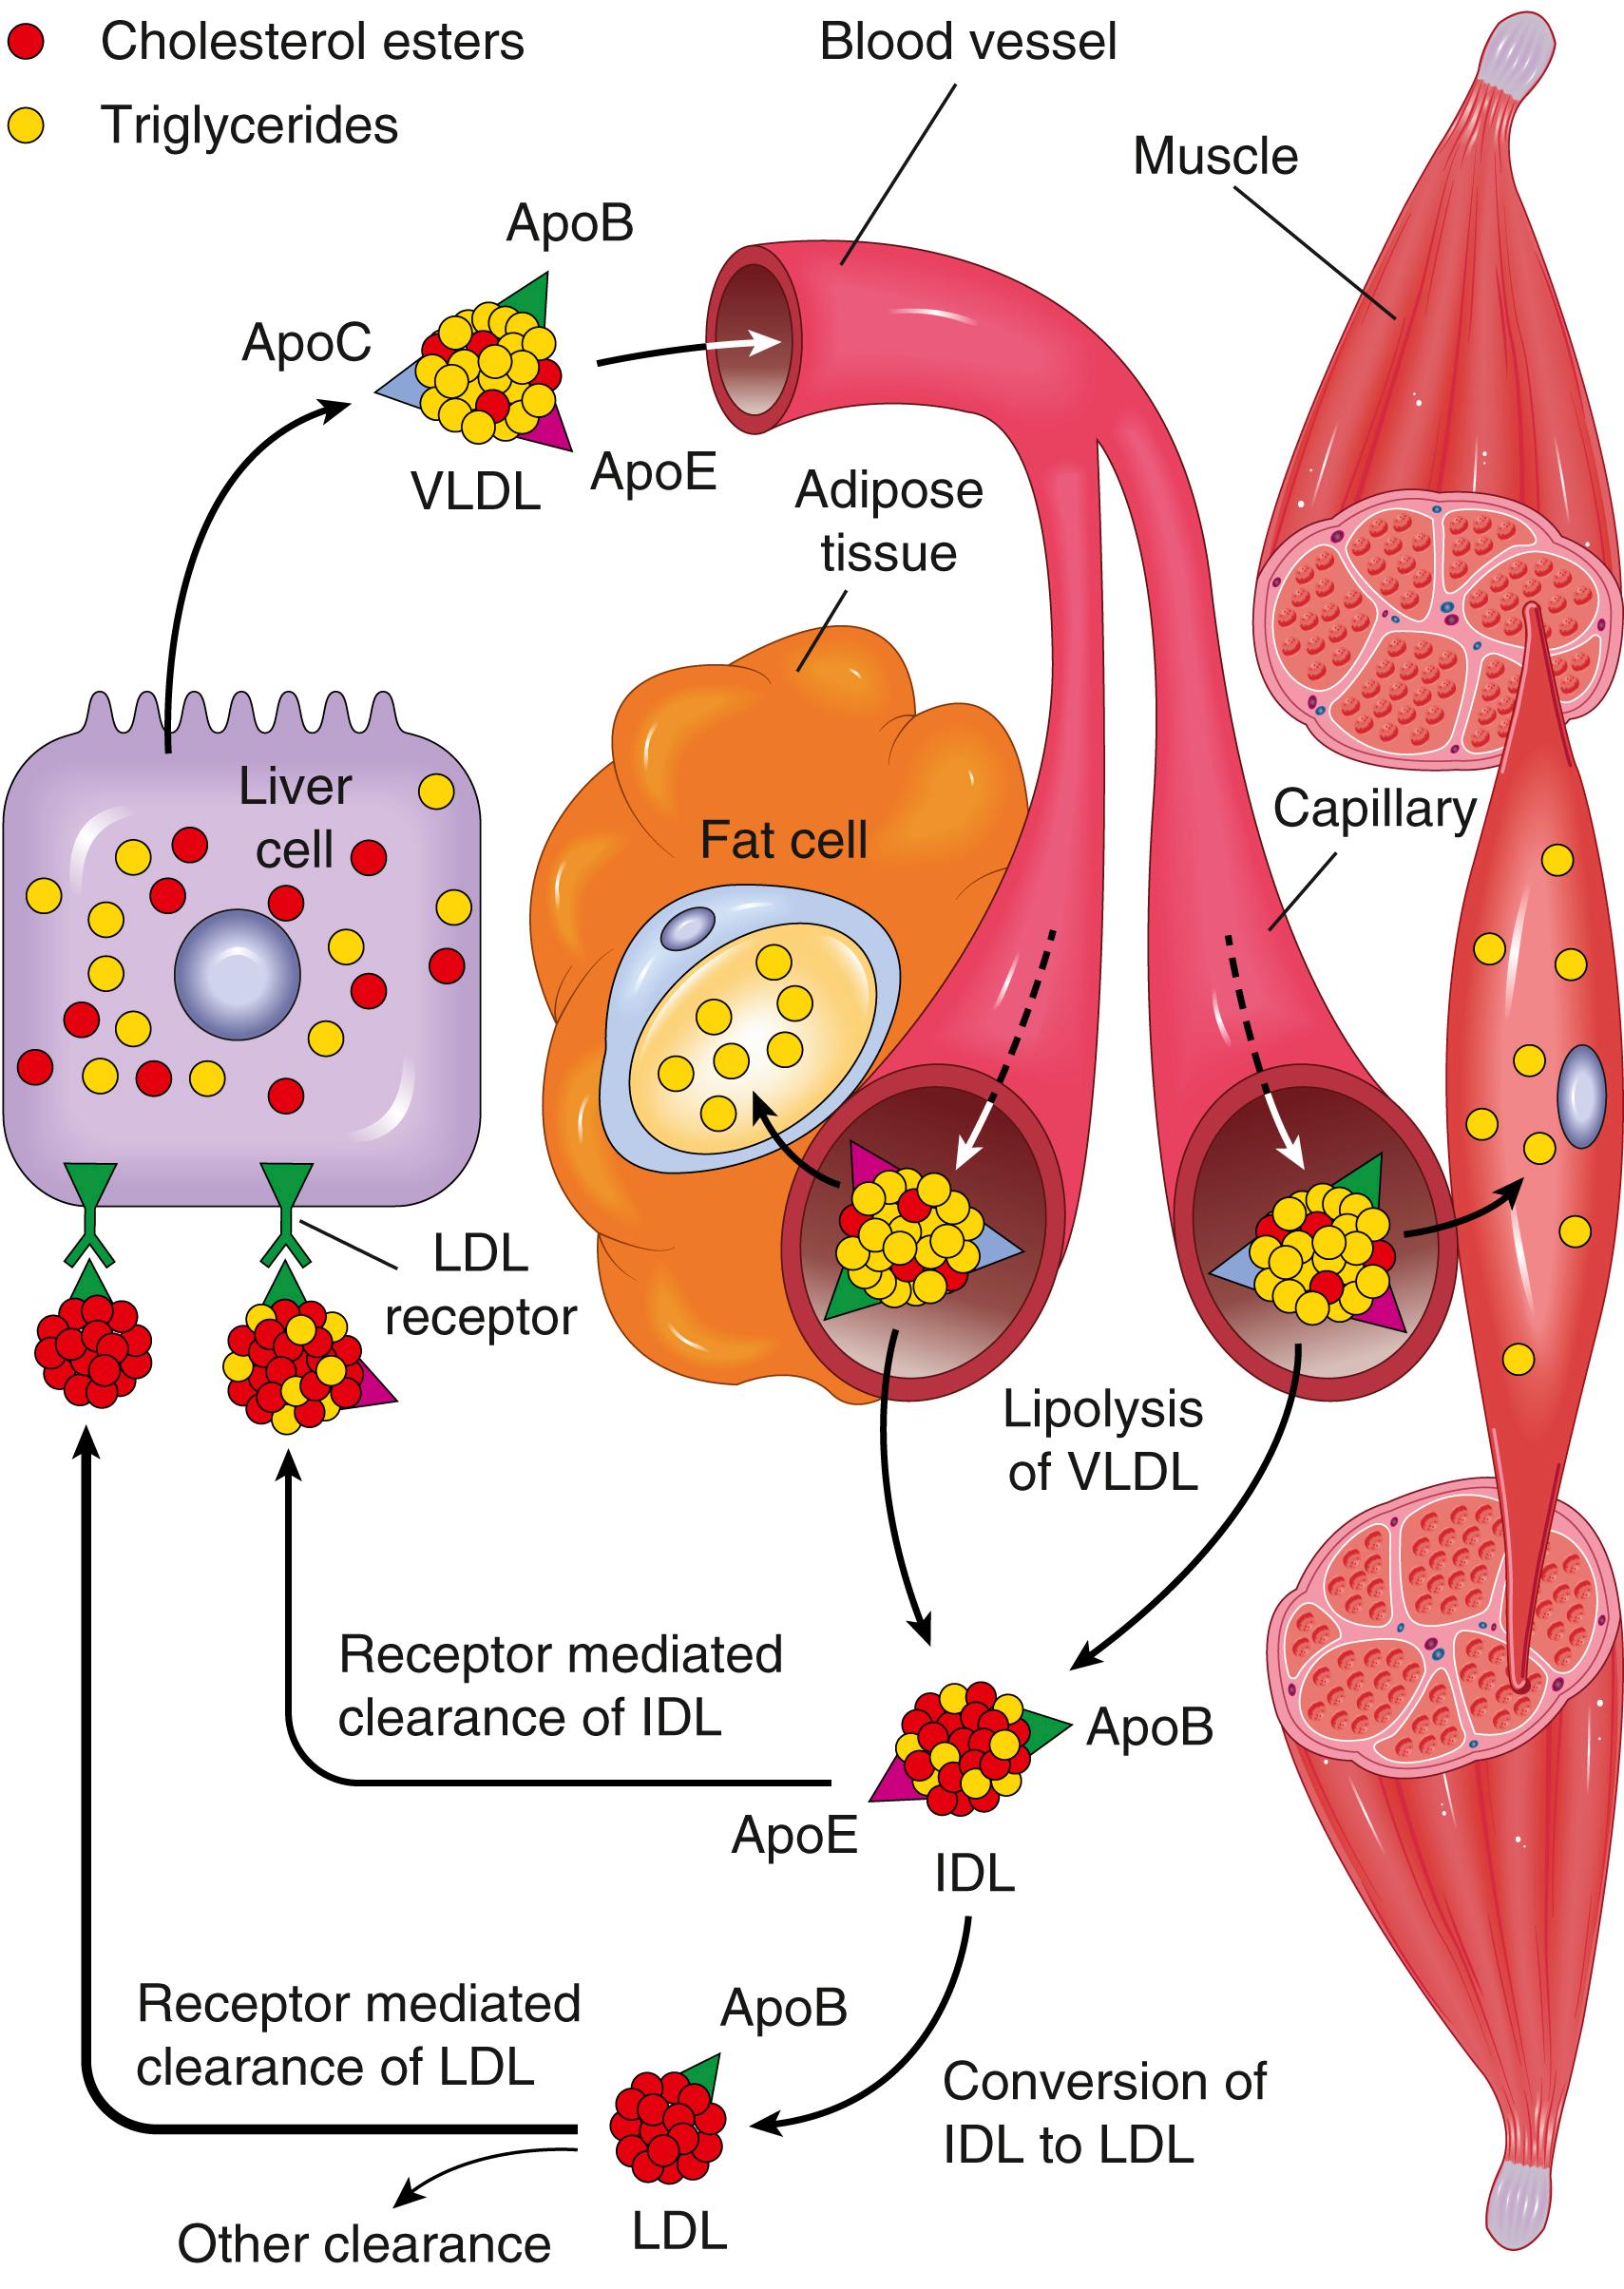 FIG. 4.5, Low-density lipoprotein (LDL) metabolism and the role of the liver in its synthesis and clearance. Lipolysis of very-low-density lipoprotein (VLDL) by lipoprotein lipase in the capillaries releases triglycerides, which are then stored in fat cells and used as a source of energy in skeletal muscles. IDL (intermediate-density lipoprotein) remains in the blood and is taken up by the liver.